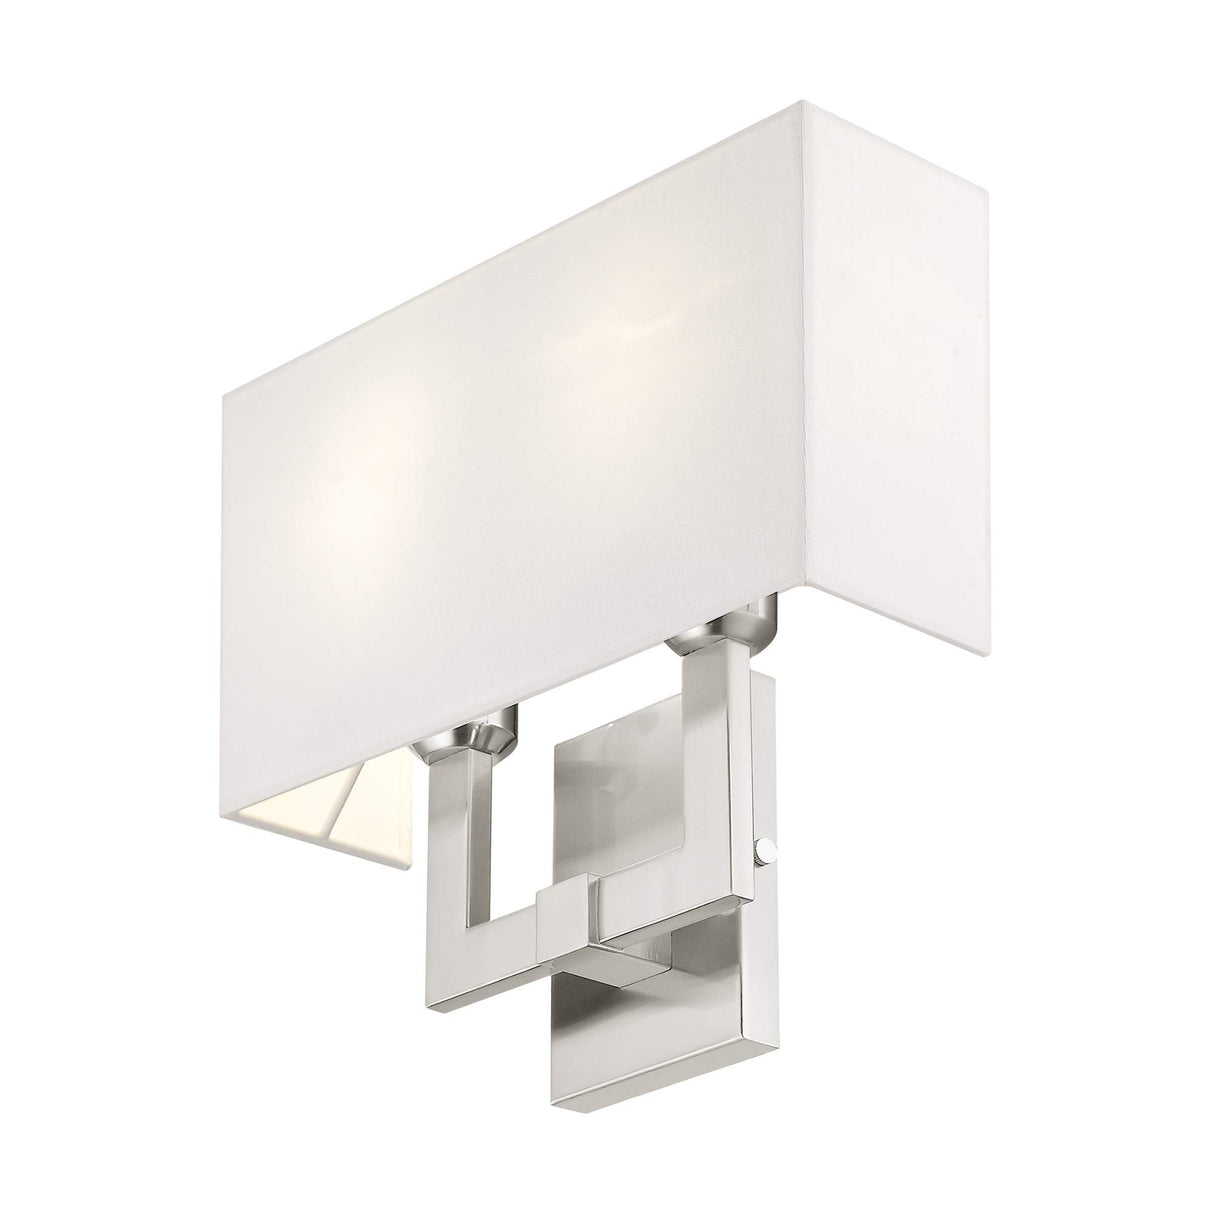 Livex Lighting 51103-91 Transitional Two Light Wall Sconce from Hollborn Collection in Pwt, Nckl, B/S, Slvr. Finish, Brushed Nickel